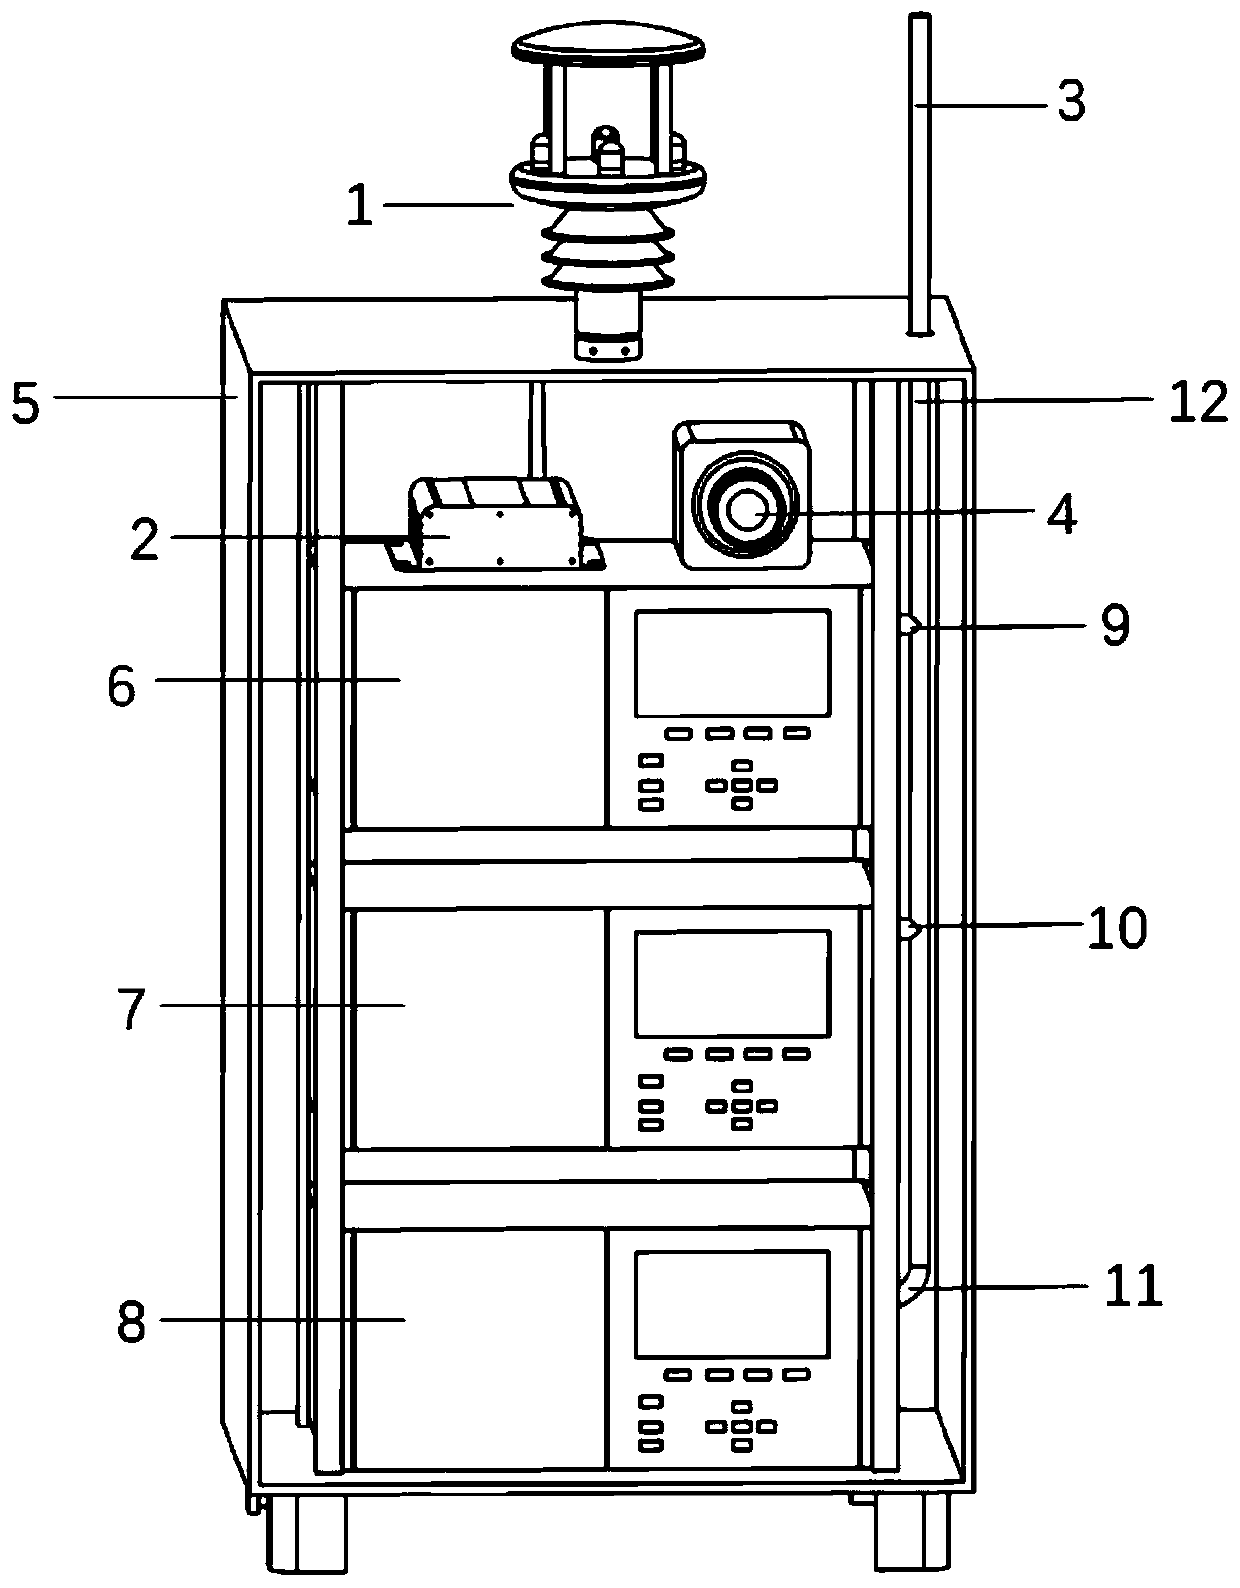 Mobile ship exhaust emission traceability device and method